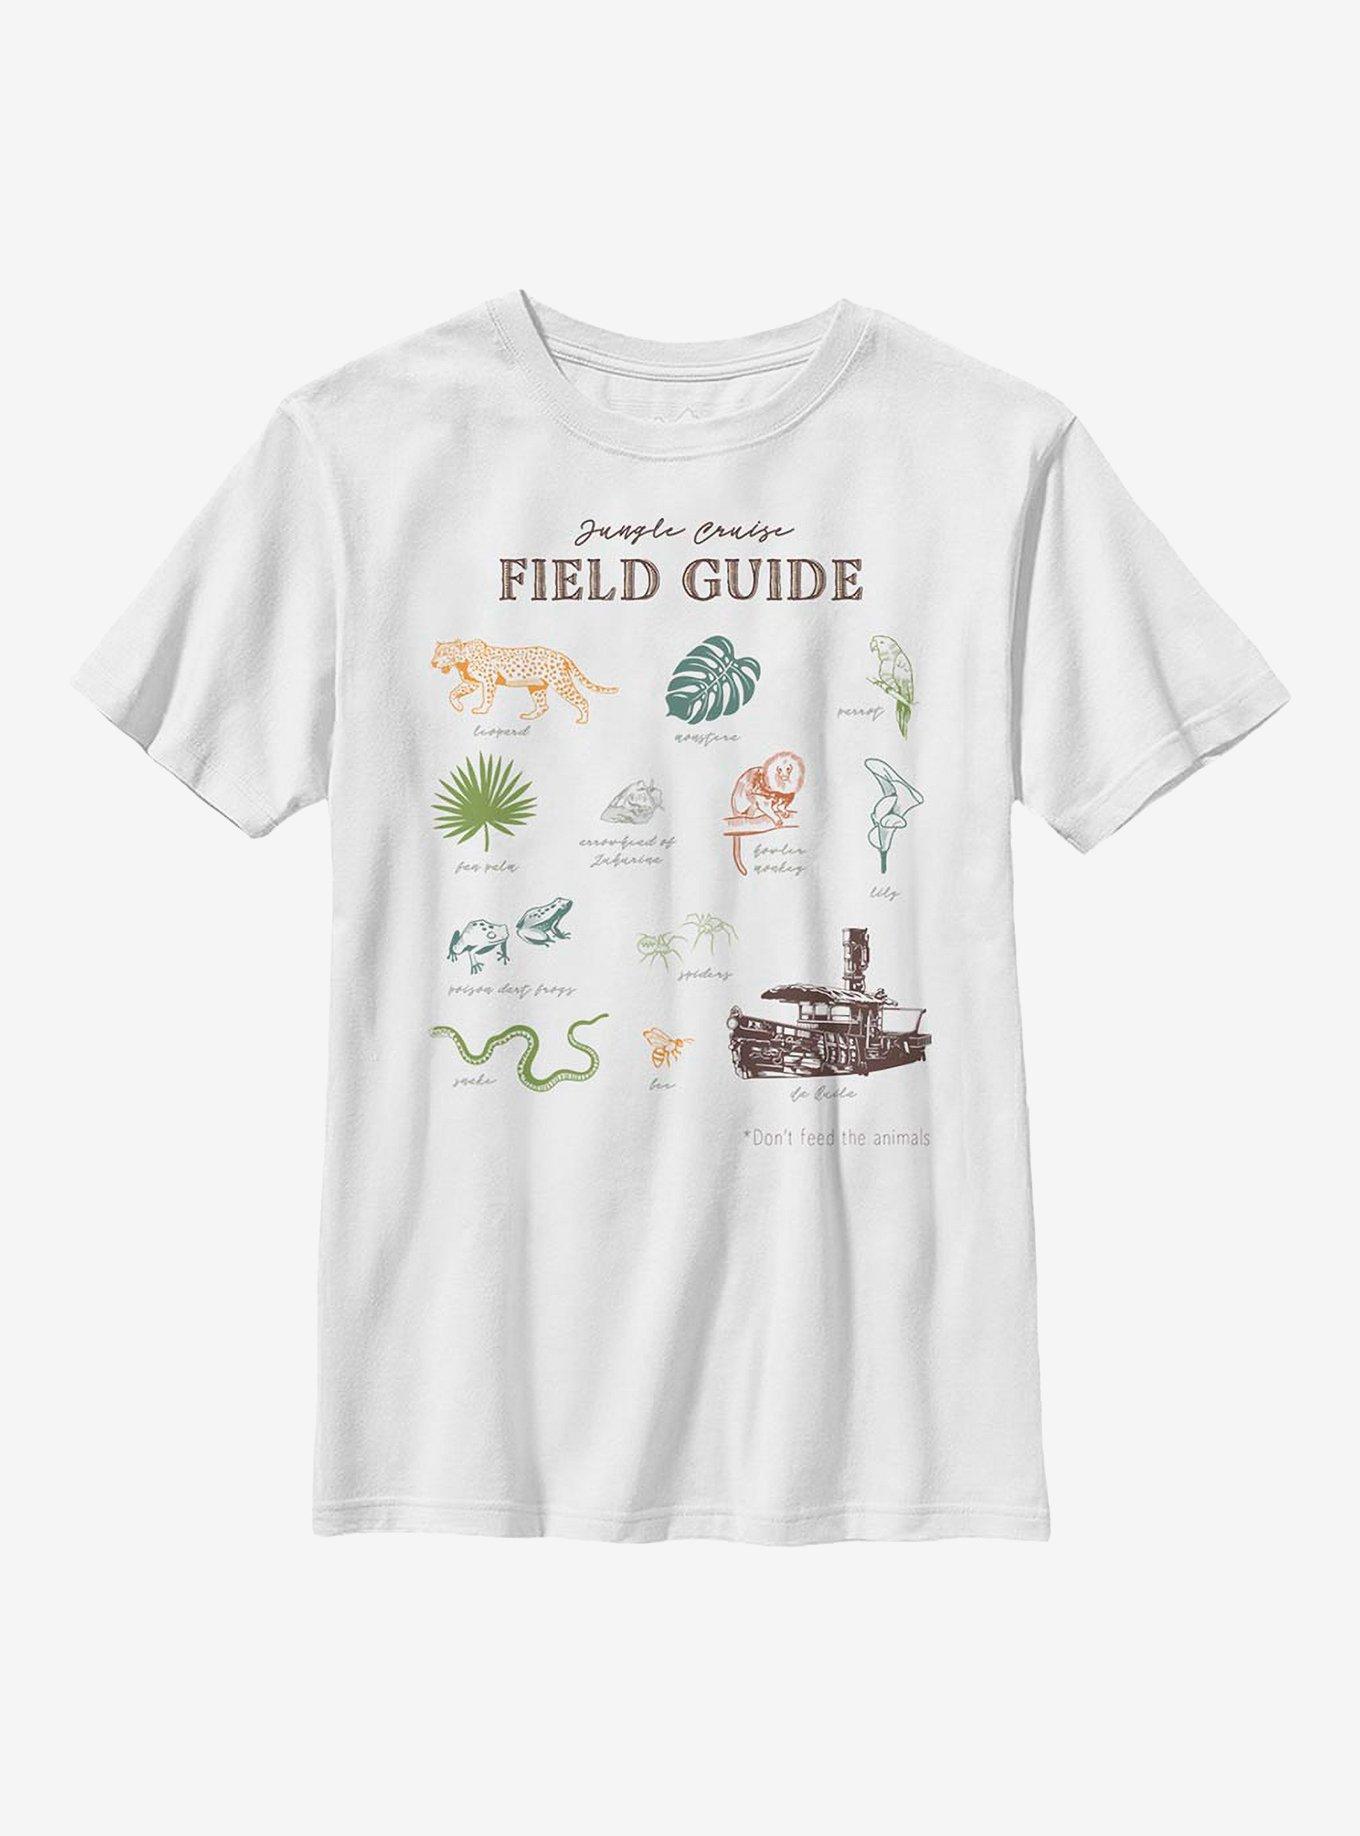 Disney Jungle Cruise Field Guide Youth T-Shirt, WHITE, hi-res